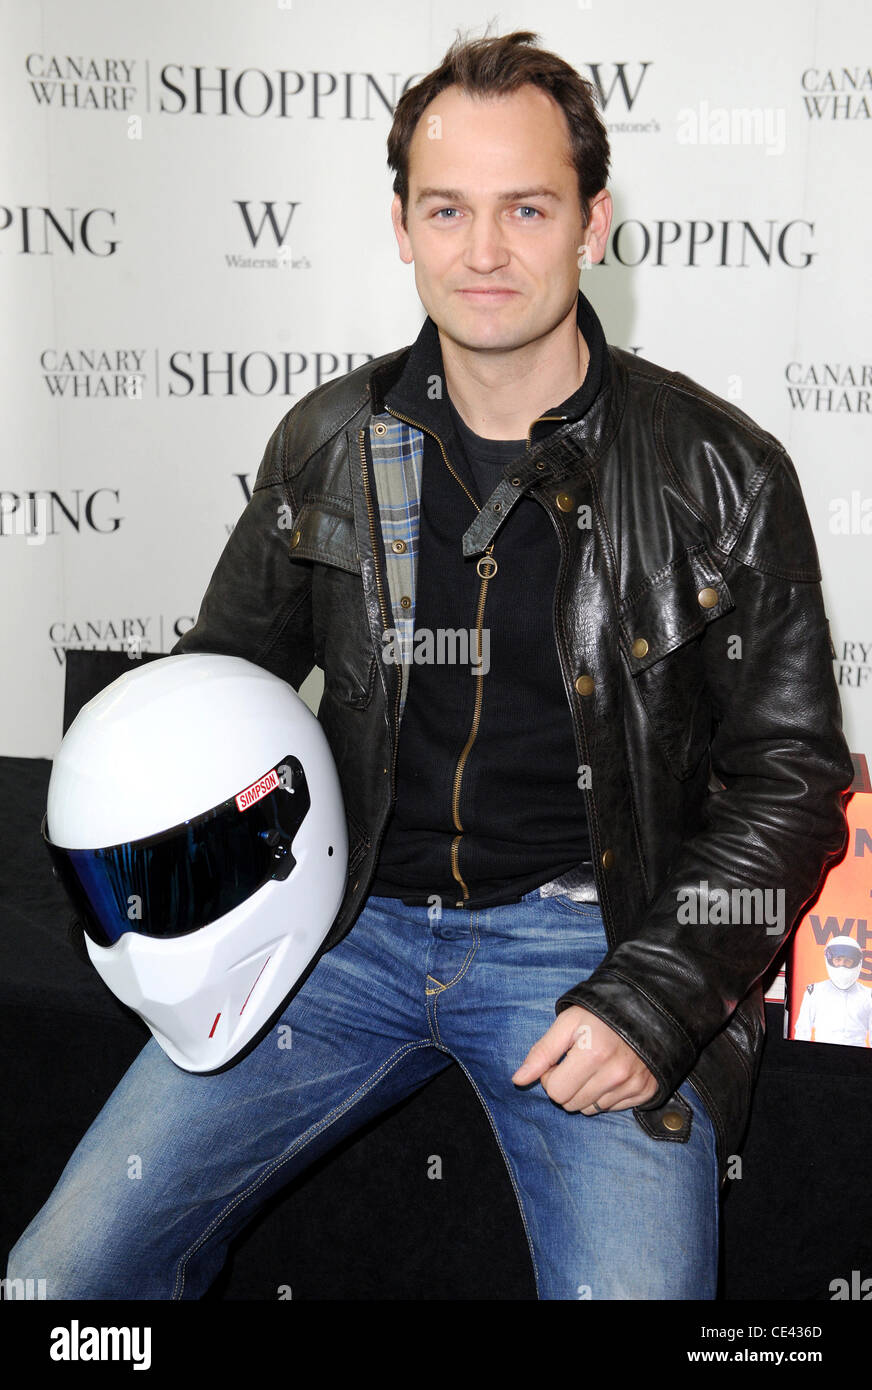 Ben Collins 'The Stig' signs his new book 'The Man in White Suit: The Stig, Mans, the Fast Lane and Me' Waterstone's, Canary Wharf London, England - 09.12.10